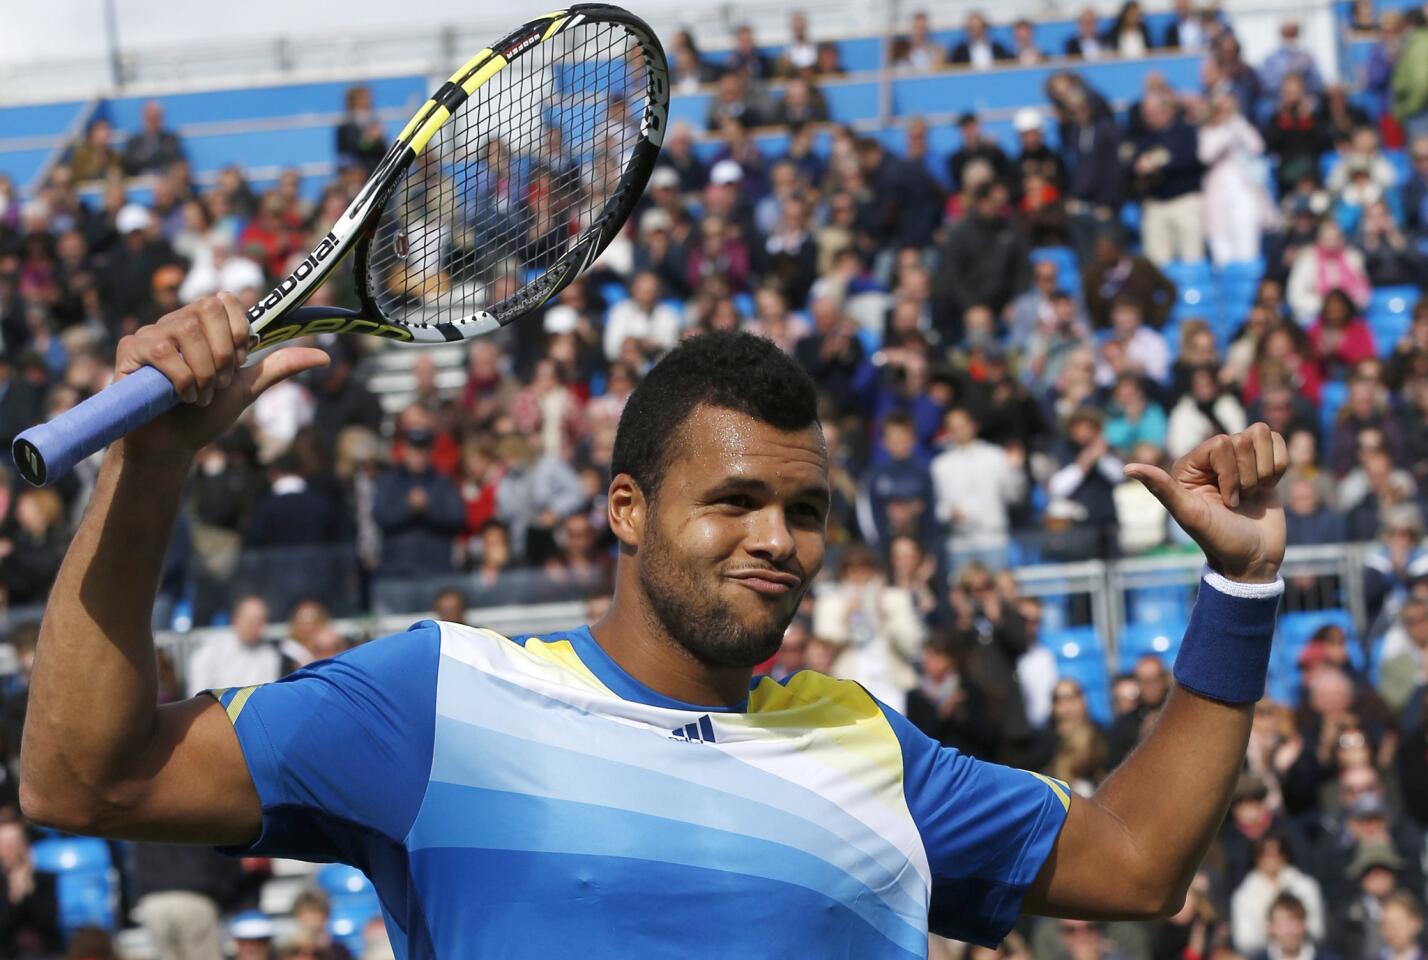 France's Jo-Wilfried Tsonga celebrates winning his men's singles tennis match against Igor Sijsling from Netherlands at the Queen's Club Championships in west London